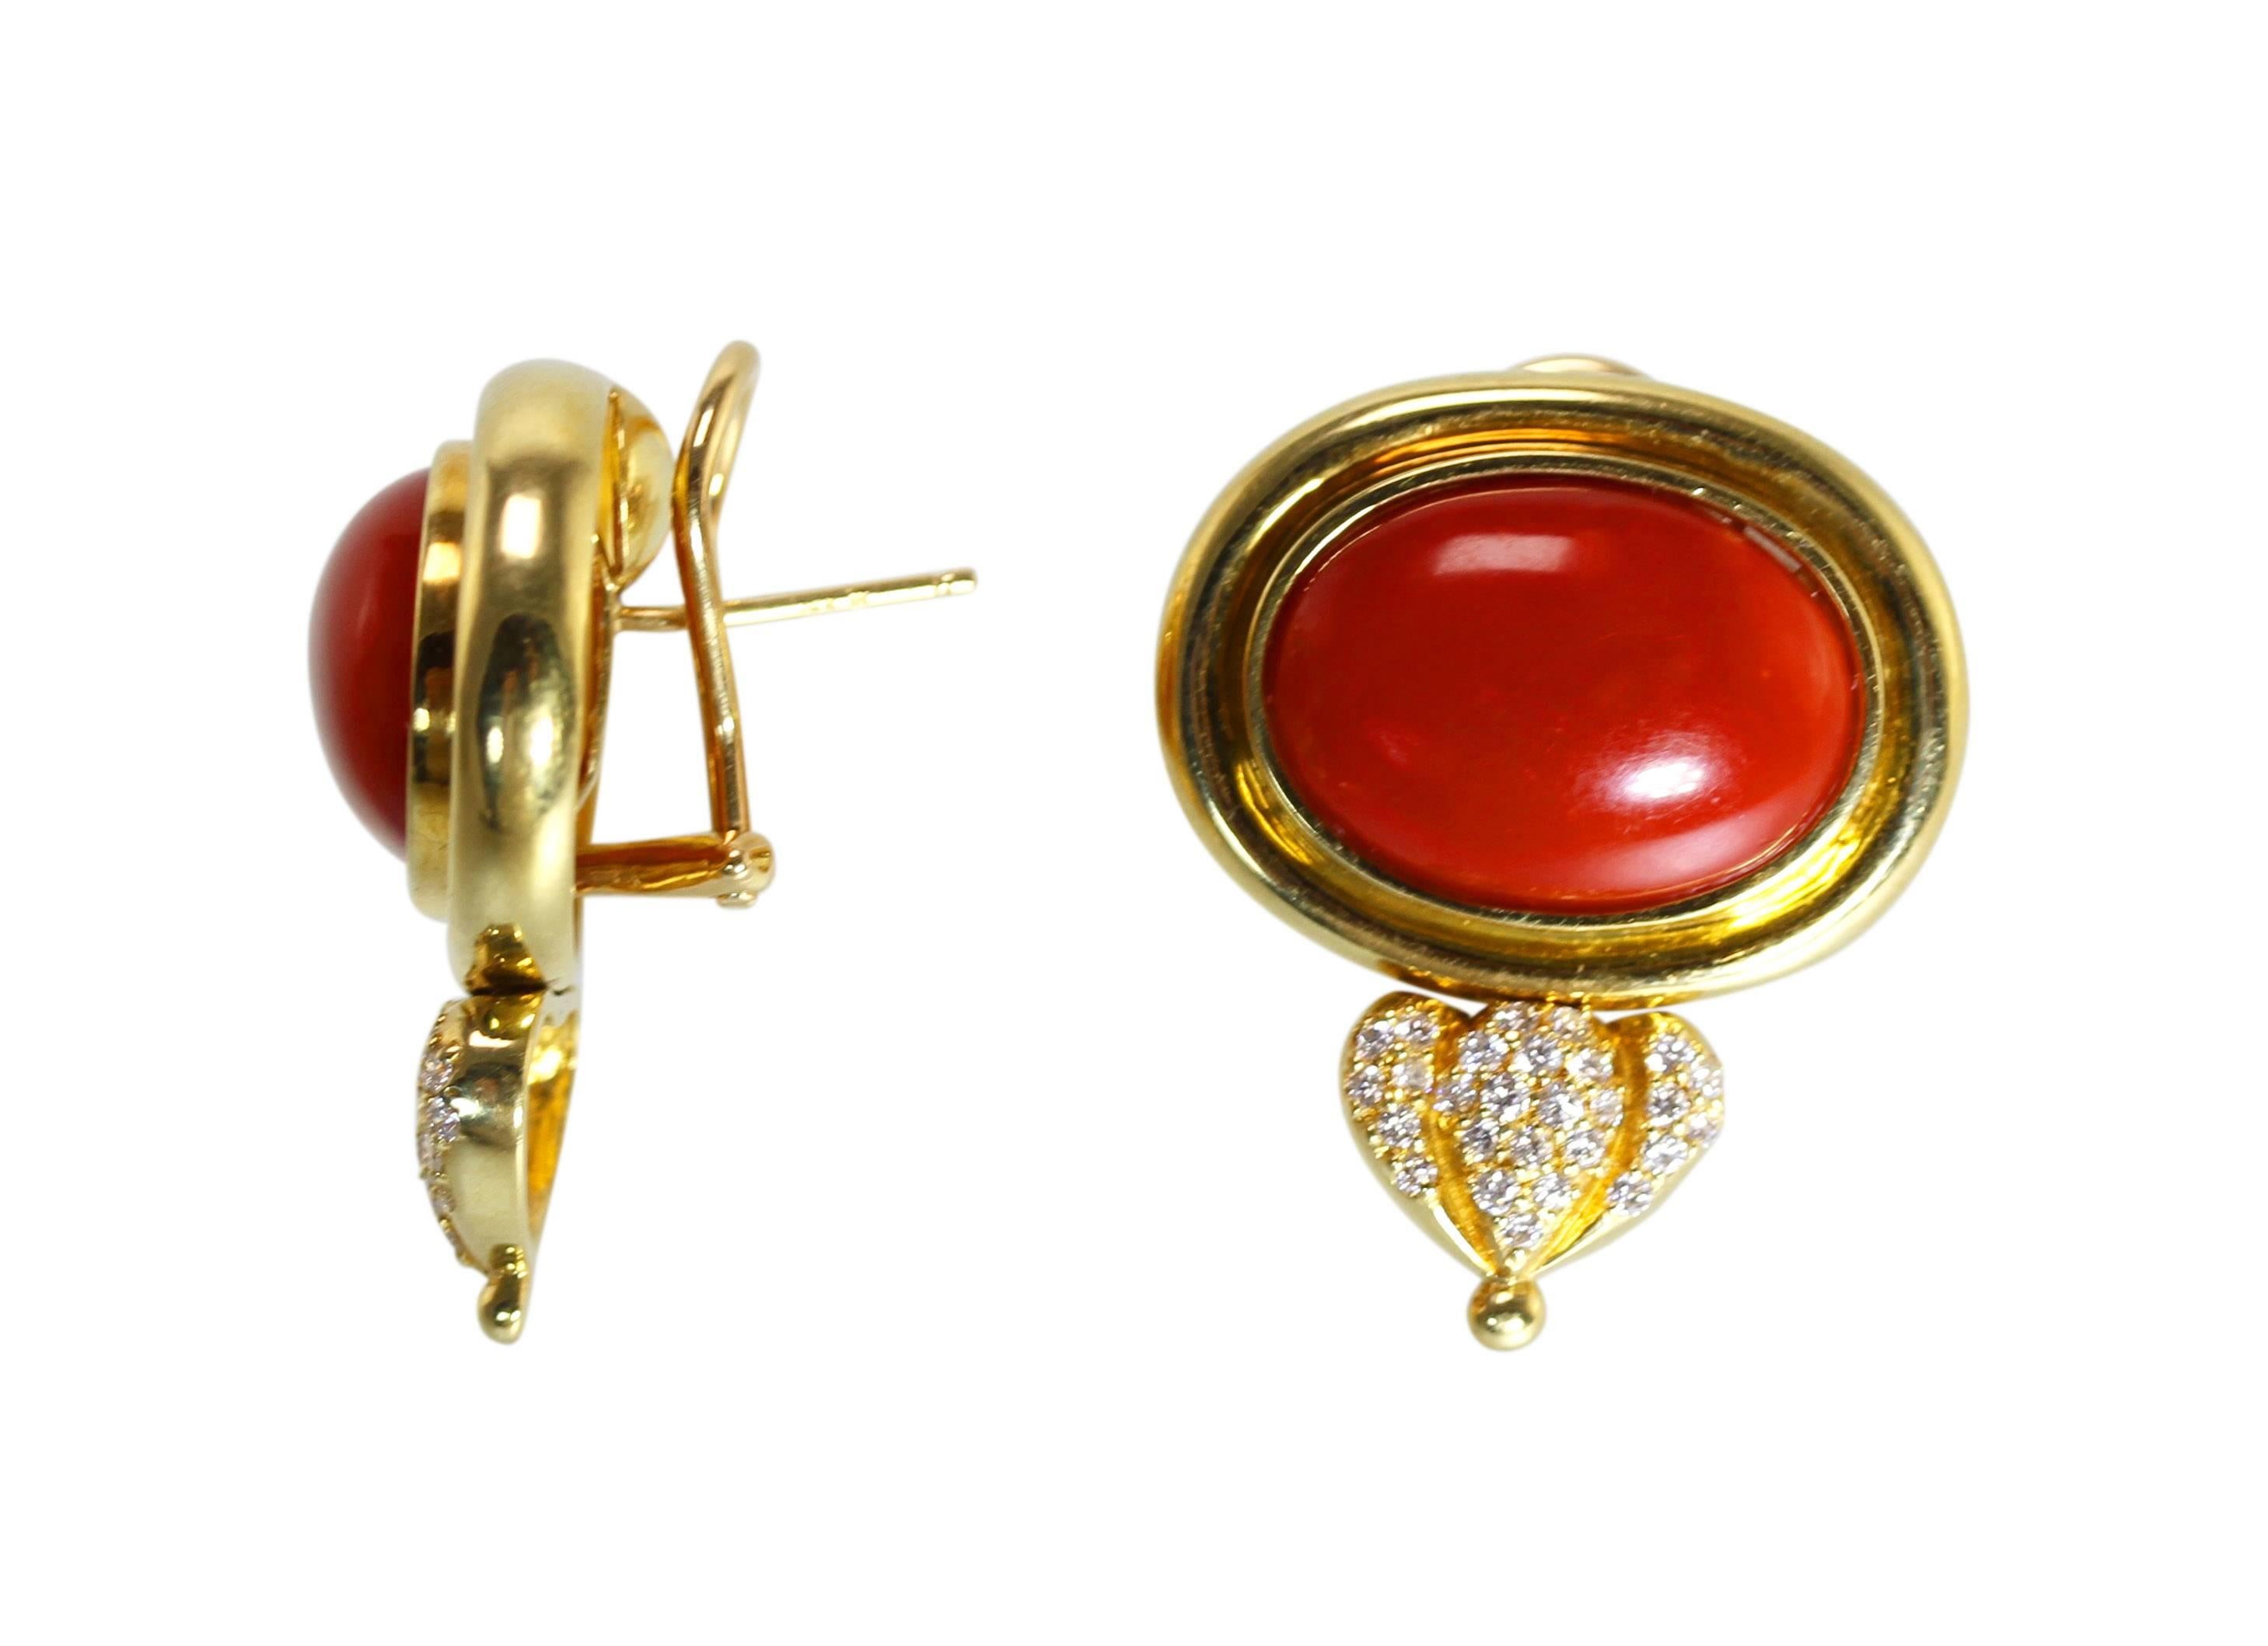 Pair of 18 Karat Gold, Coral and Diamond Earclips
• Stamped 18k
• Two elongated cabochon coral each measuring approximately 18.0 by 13.0 by 8.0 mm
• 52 round diamonds approximately 0.75 carat
• Measuring 1 by 1 1/8 inches, gross weight 25.3 grams